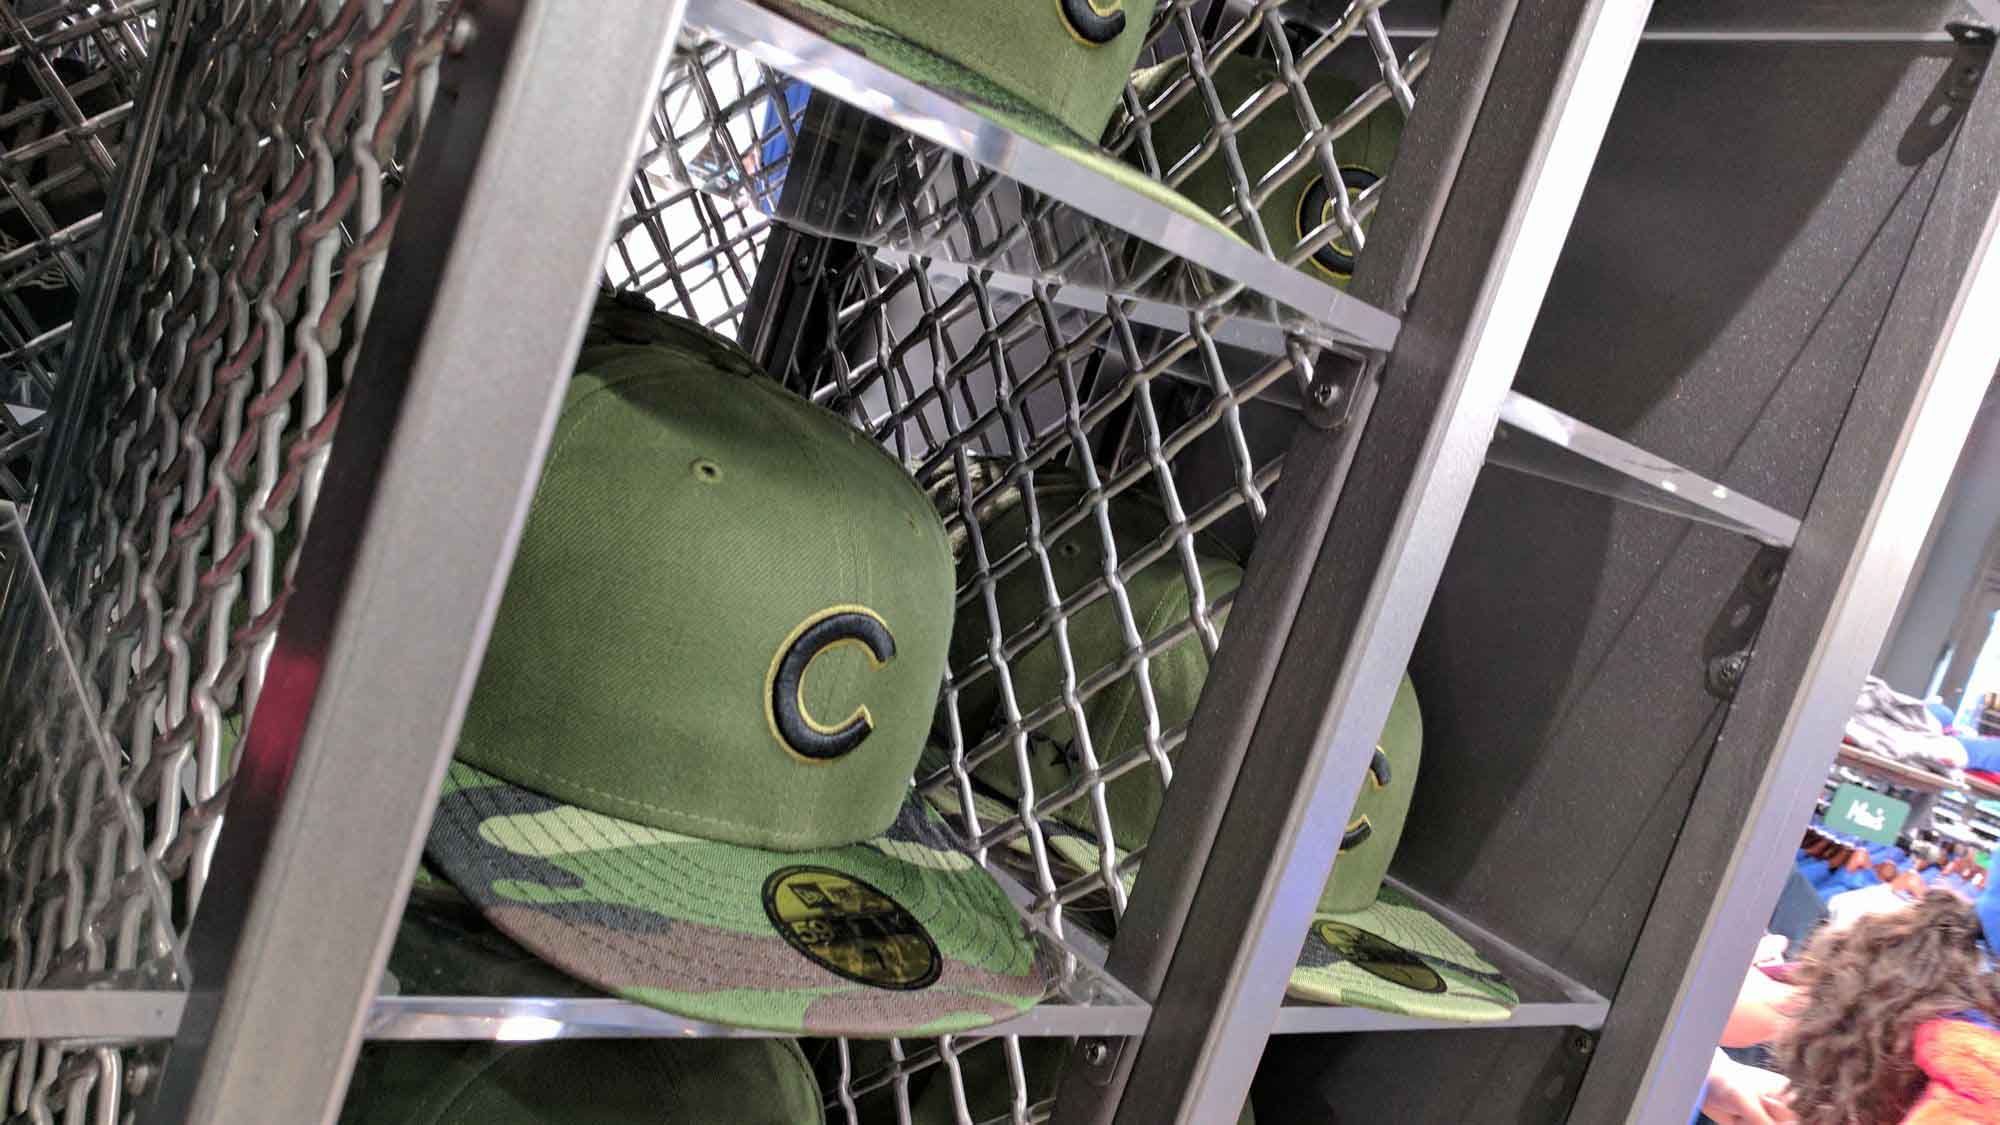 Lock Crimp Wire Mesh used in cubbies at a Chicago Cubs retail shop.